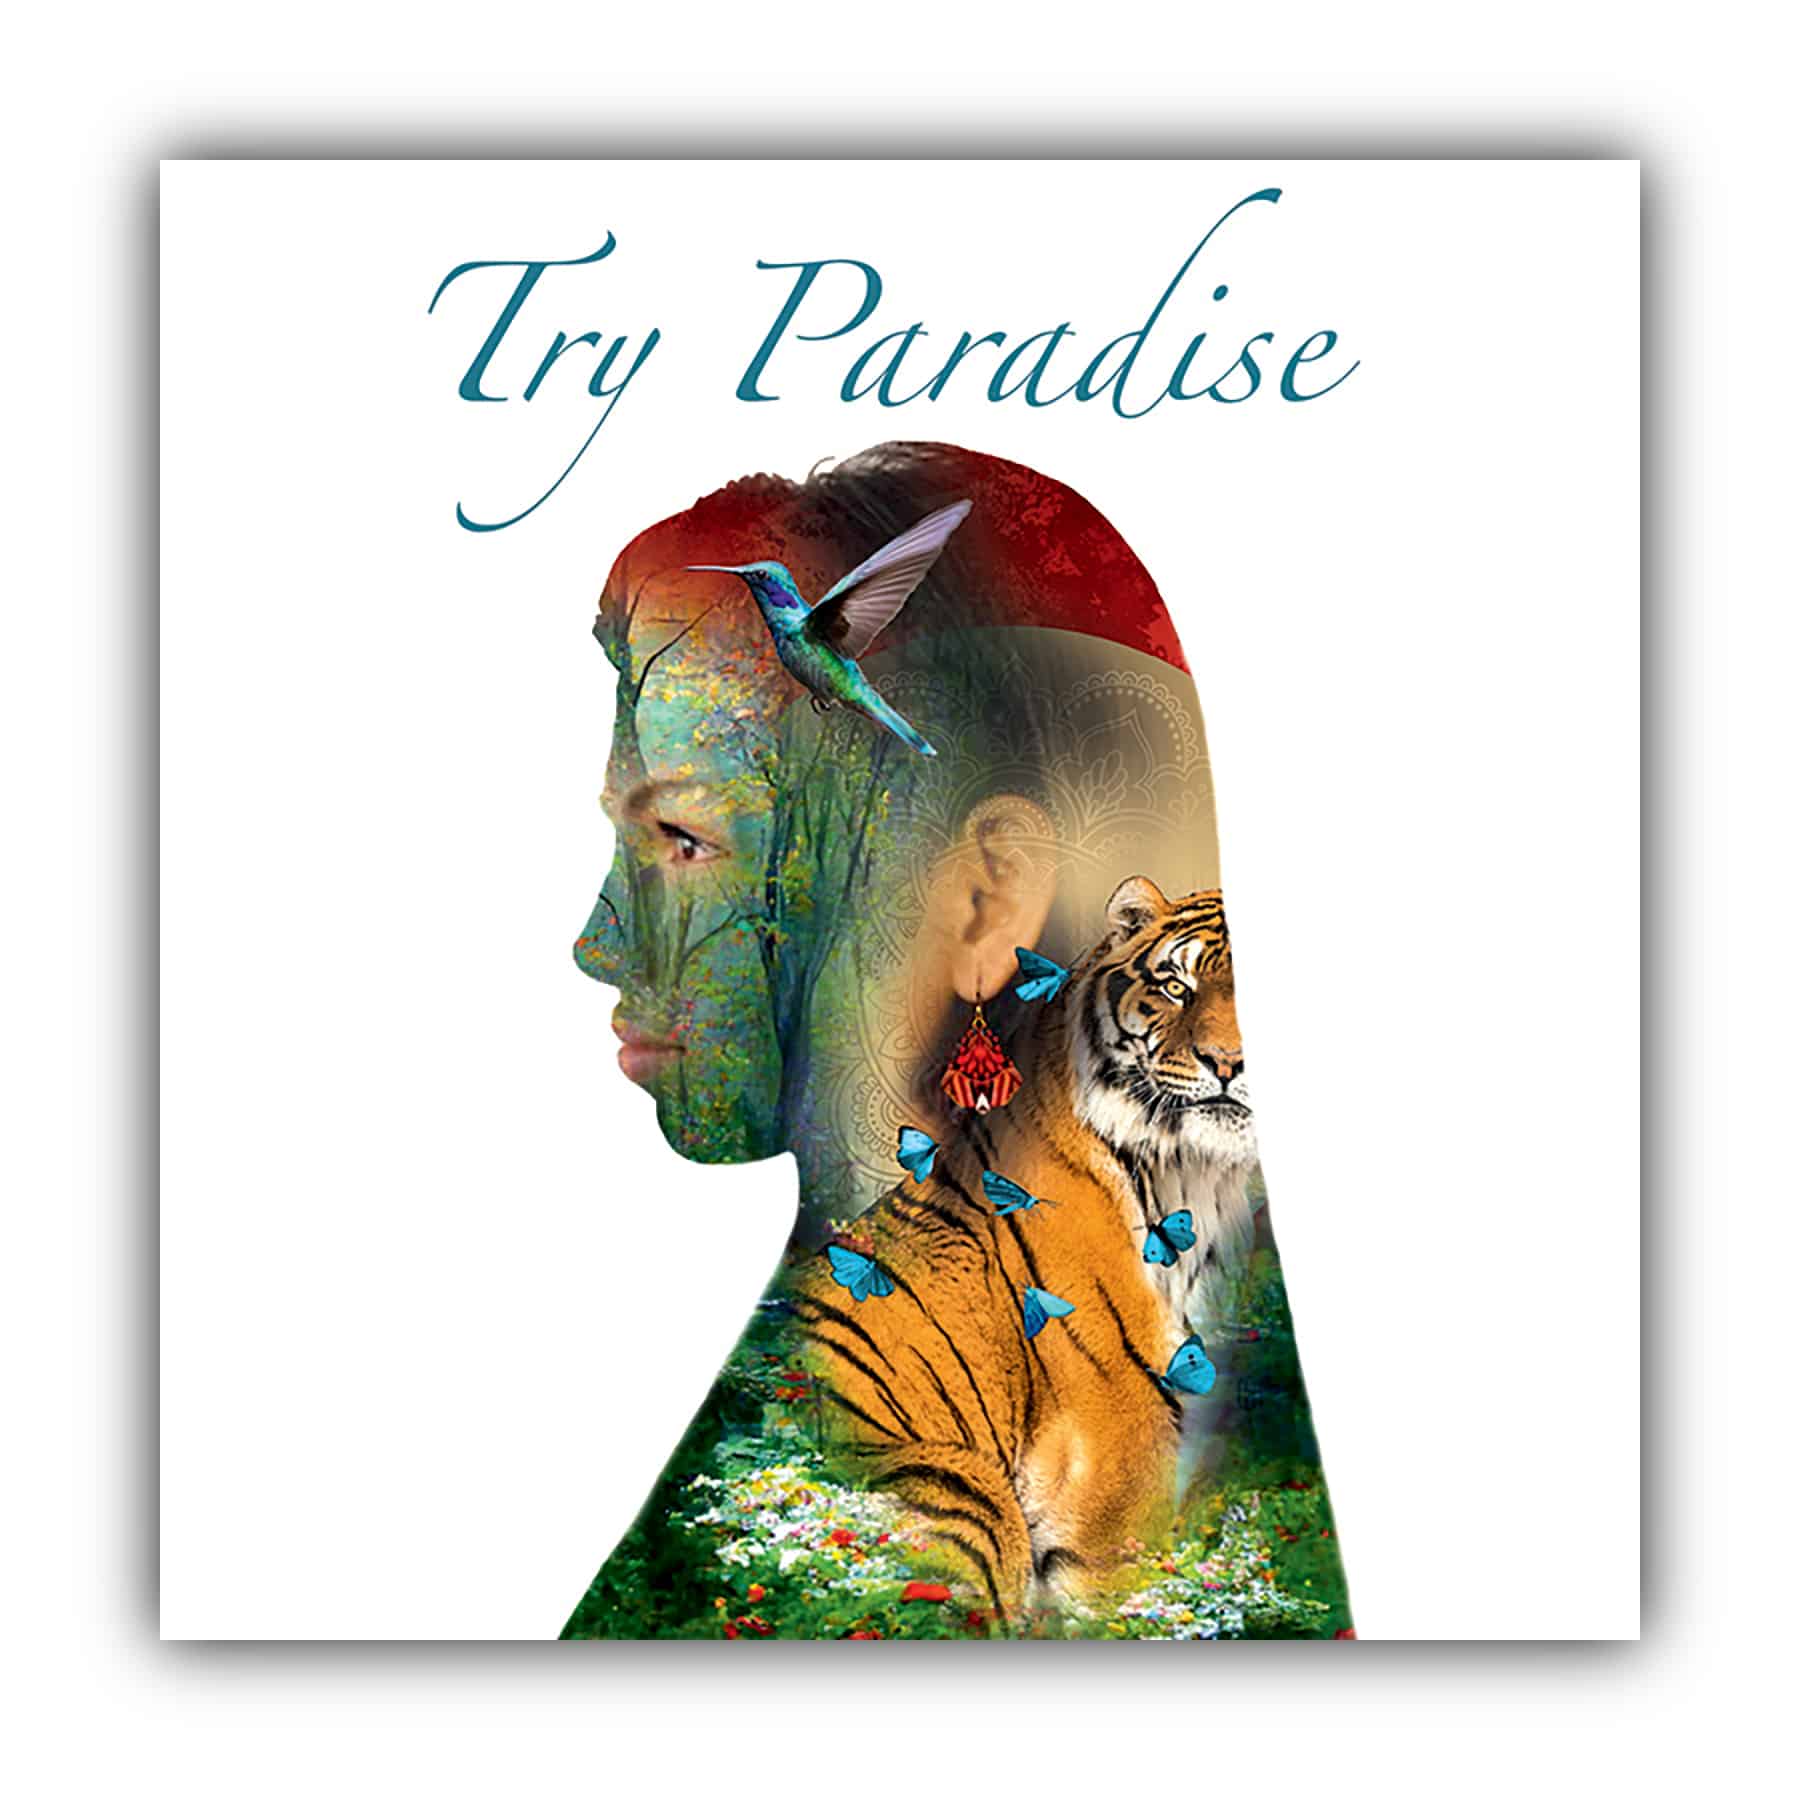 TRY PARADISE